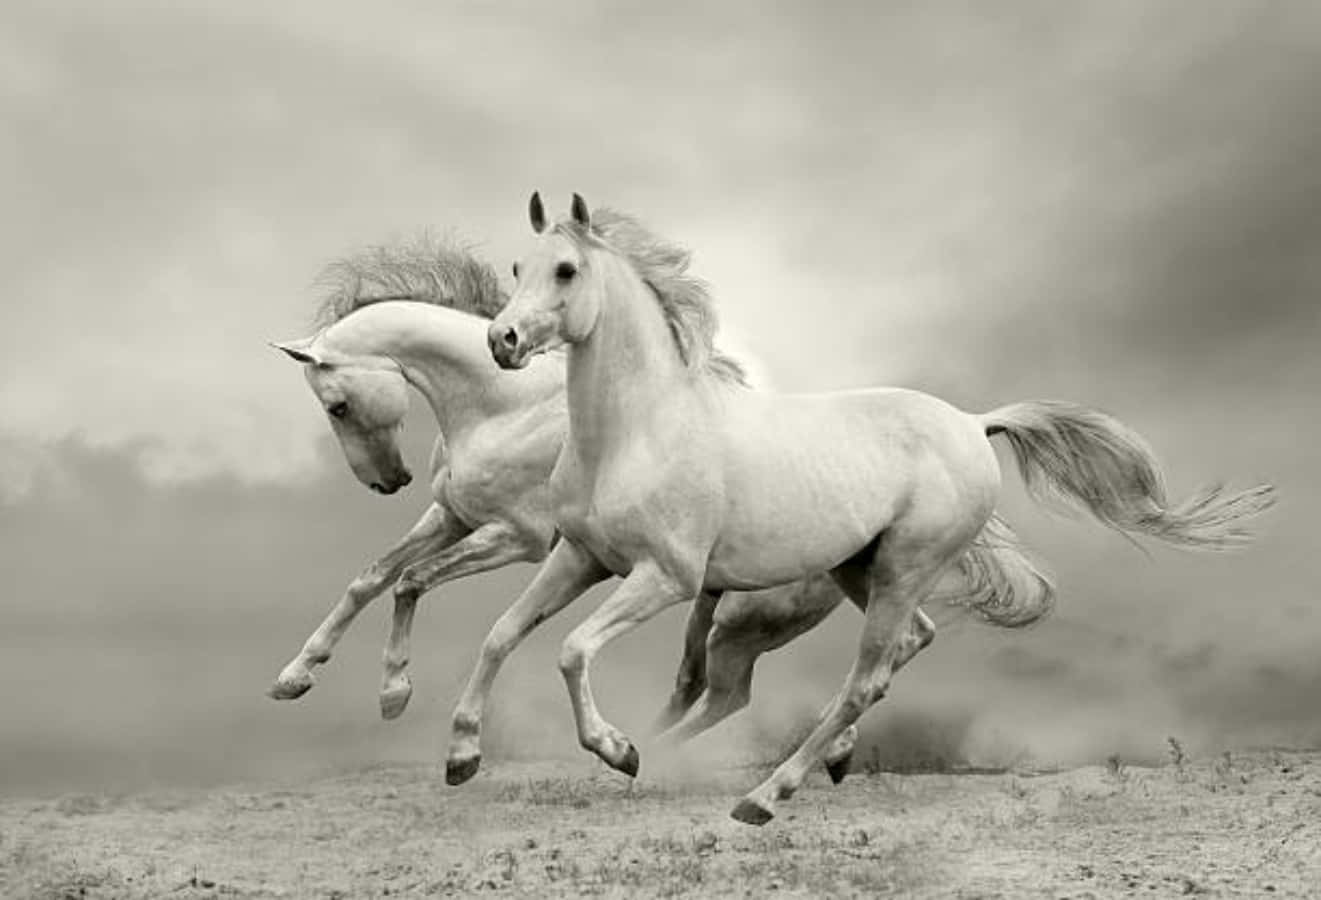 Two Horses Running In The Field In Black And White